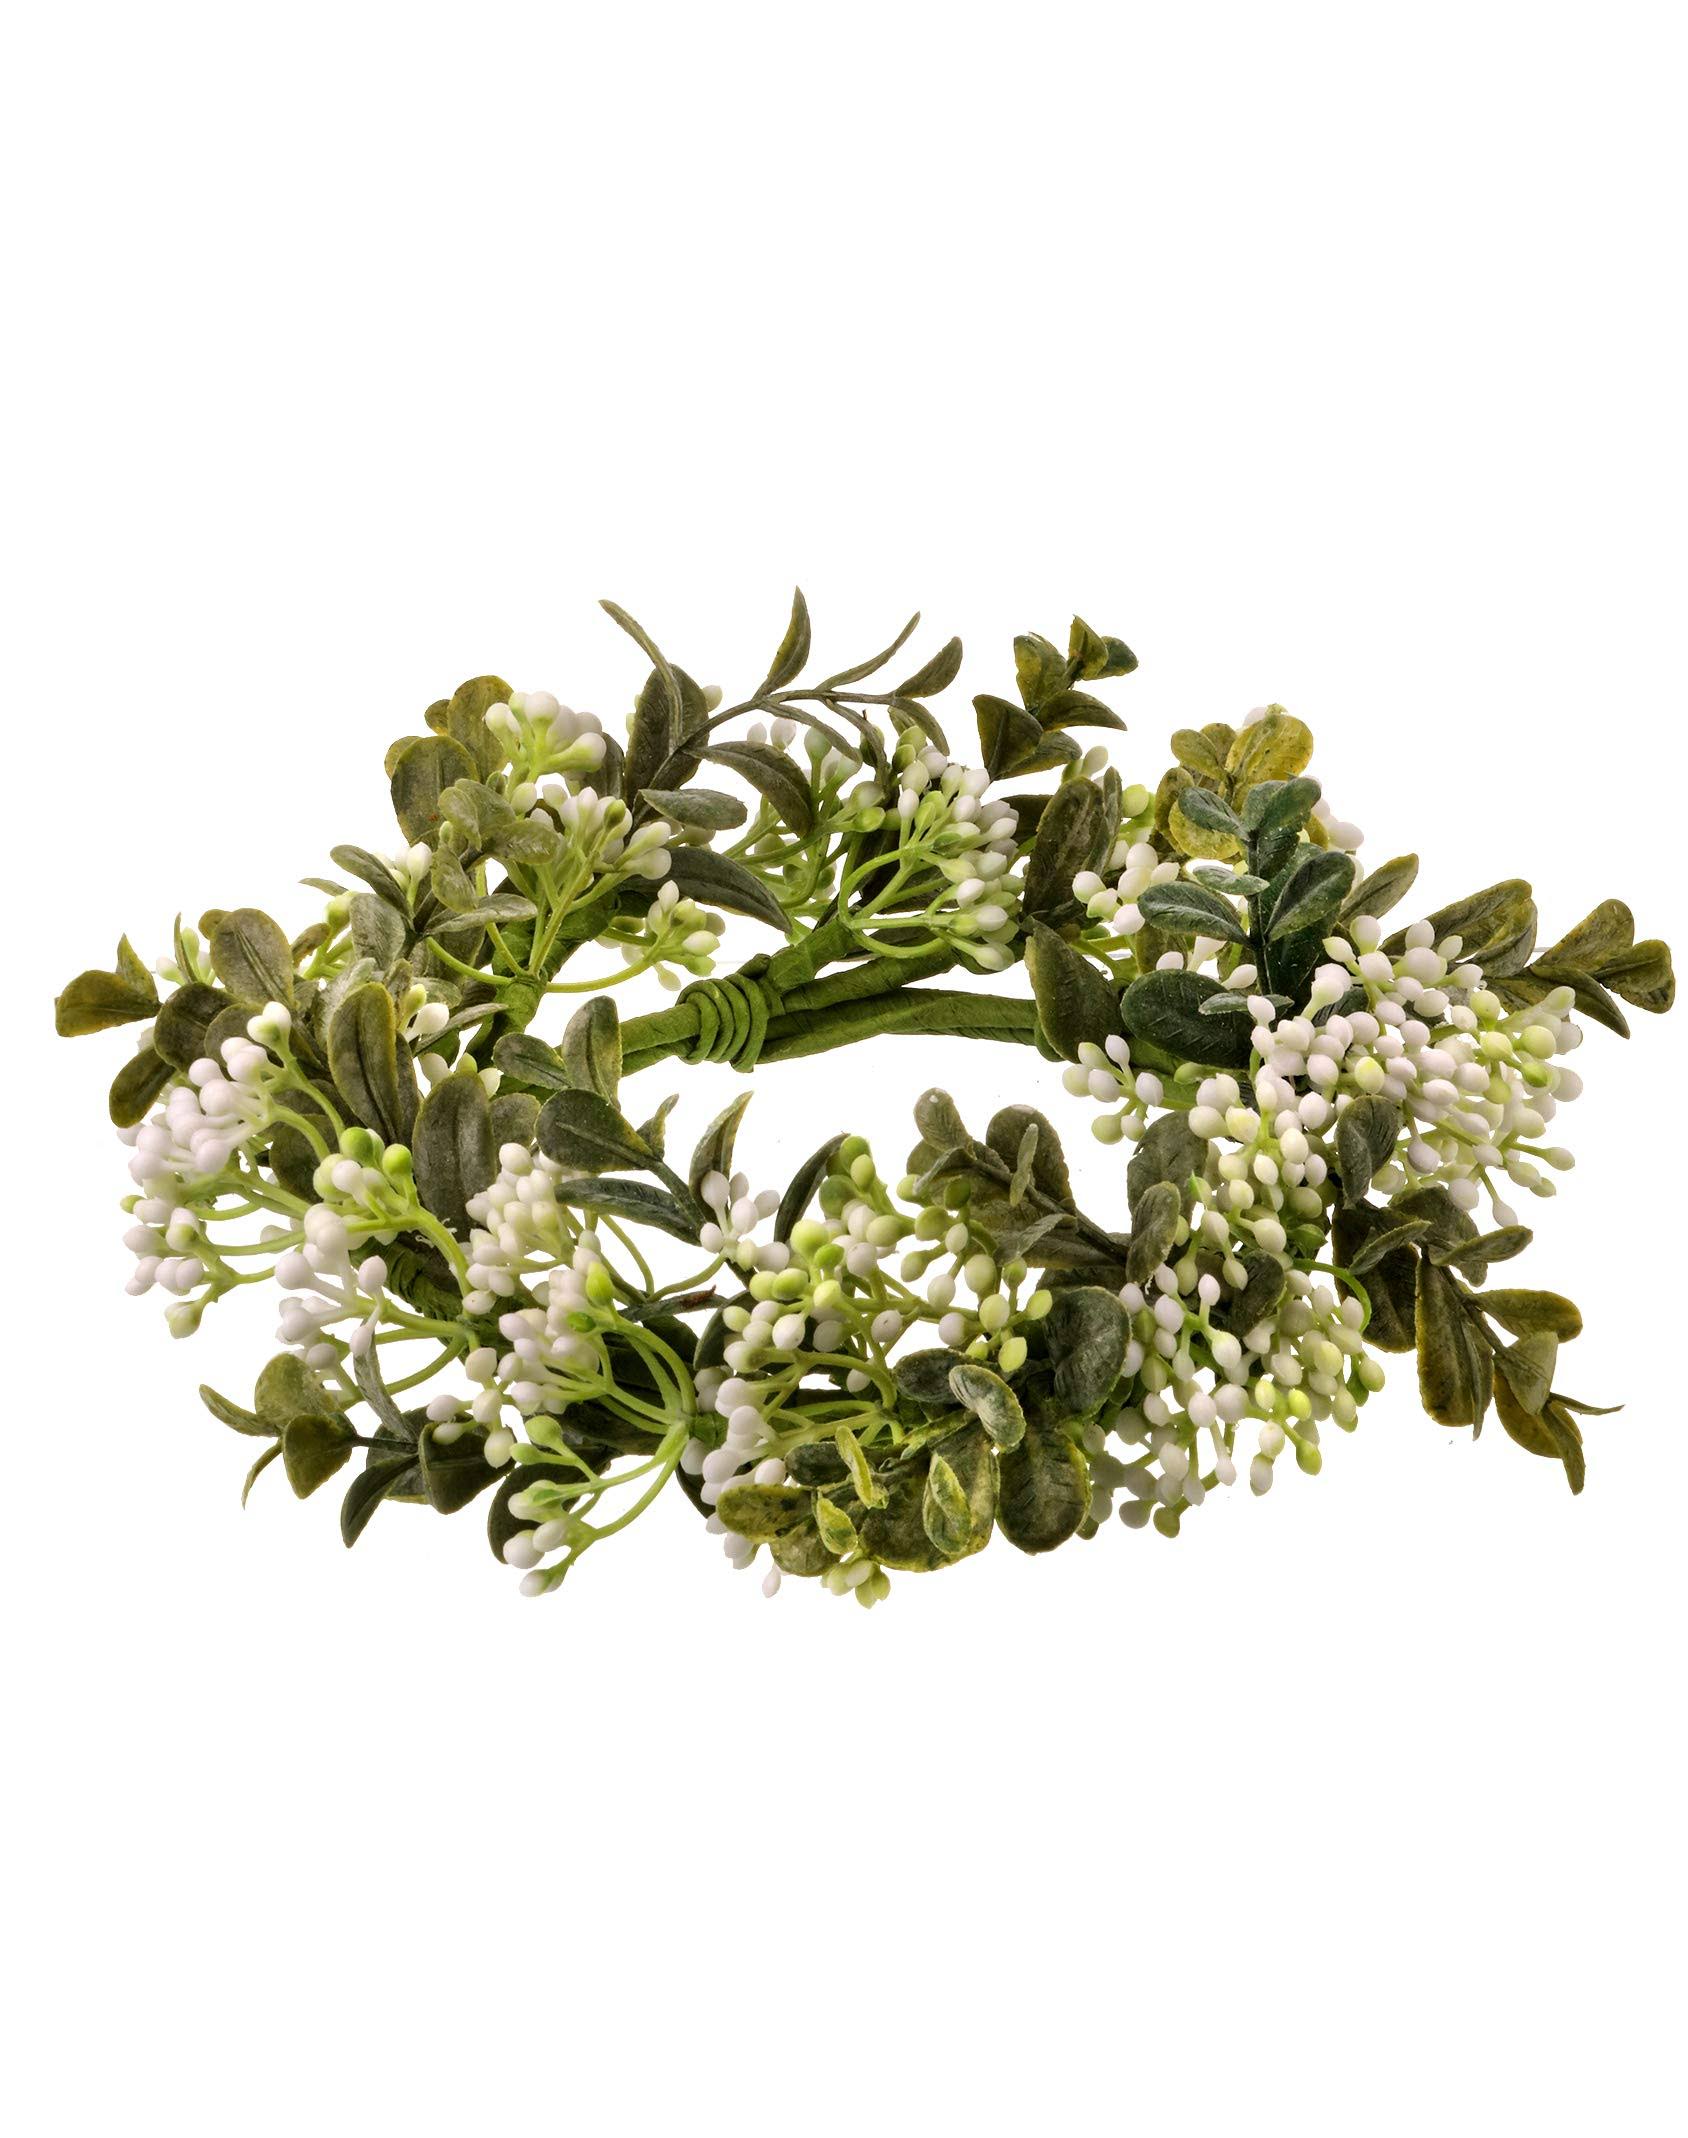 9 inch Spring and Summer Floral Pillar Candle Ring with Artificial Floral in White and Green, 9 Inches x 3 Inches